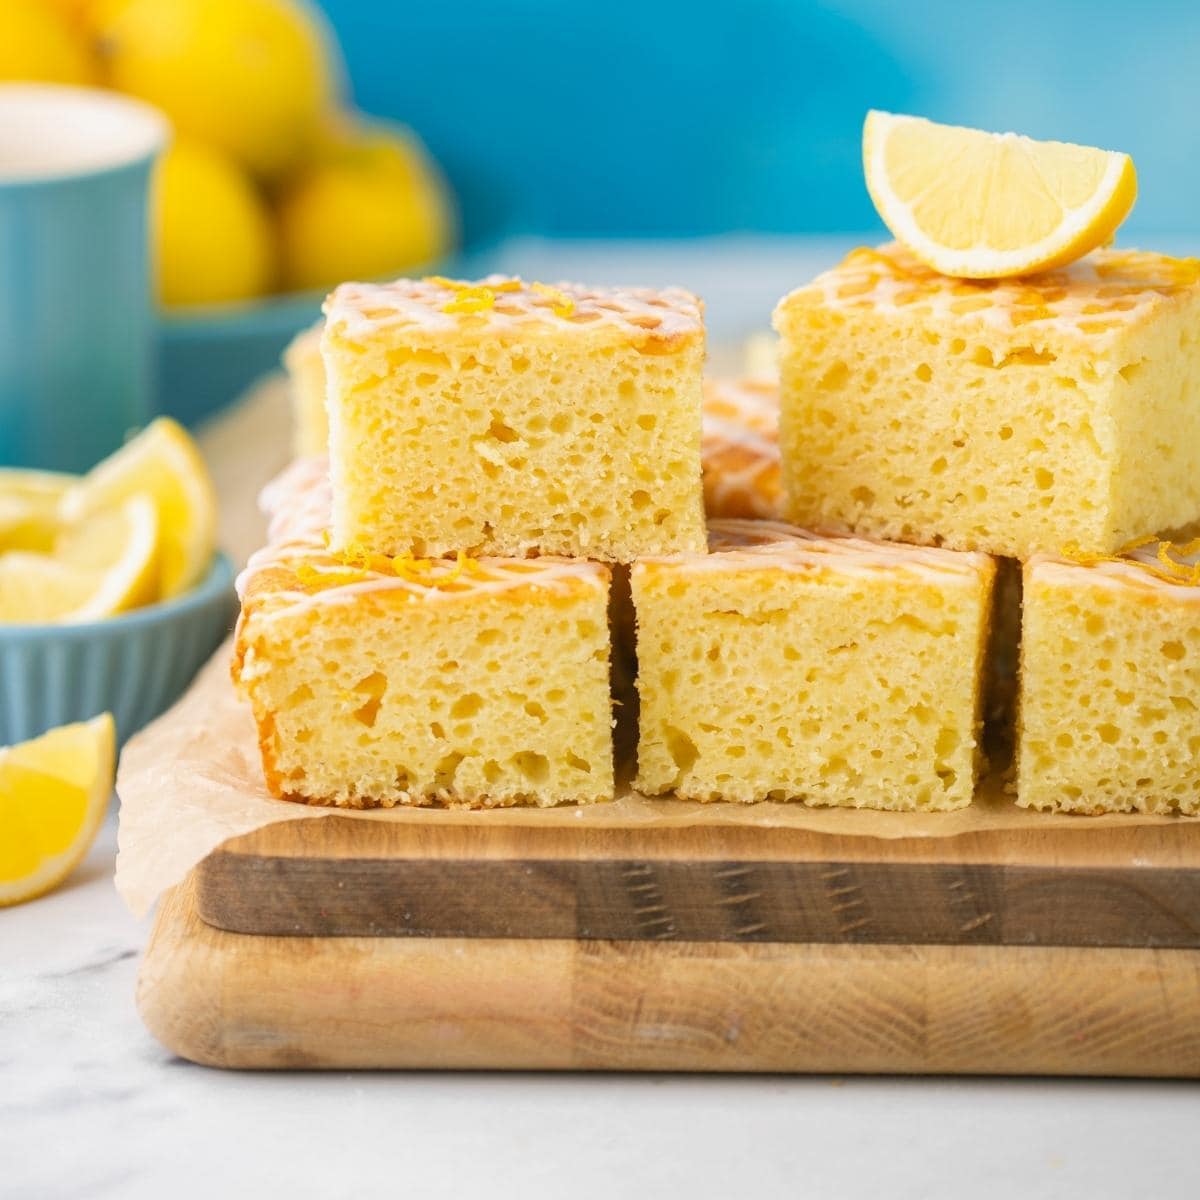 lemon ricotta cake cut into square slices drizzled with lemon glaze over the top.